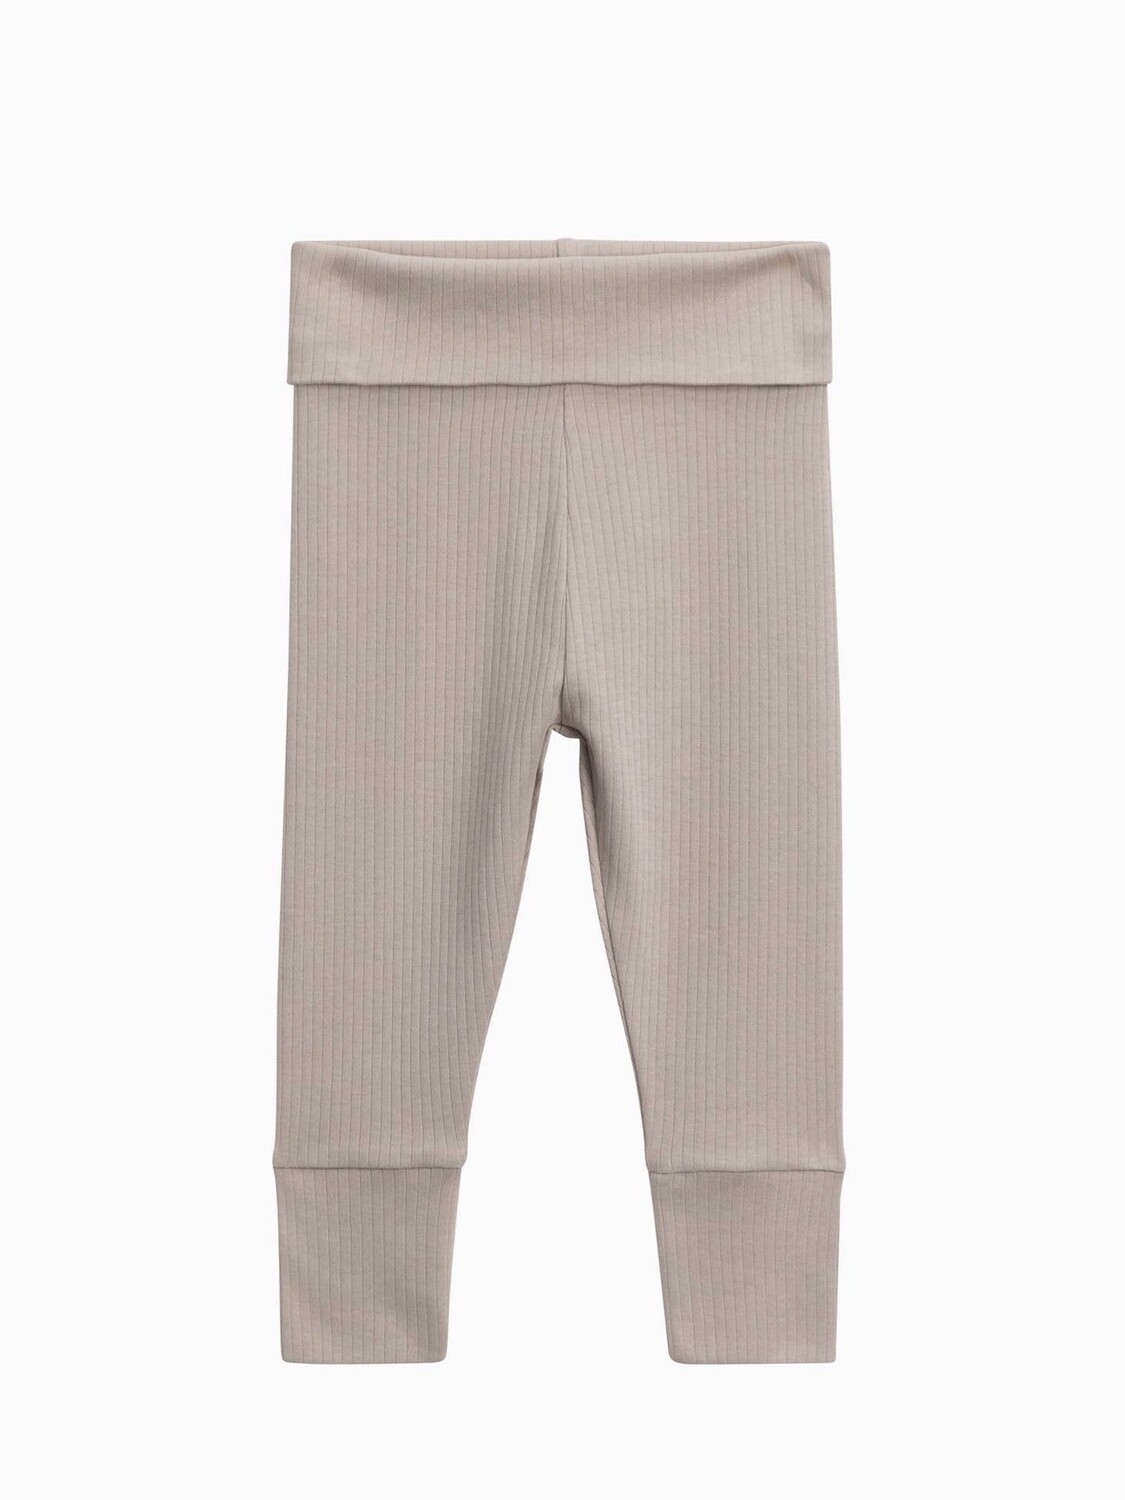 Organic Baby Ribbed Foldover Joggers, Color: Dove, Size: NB